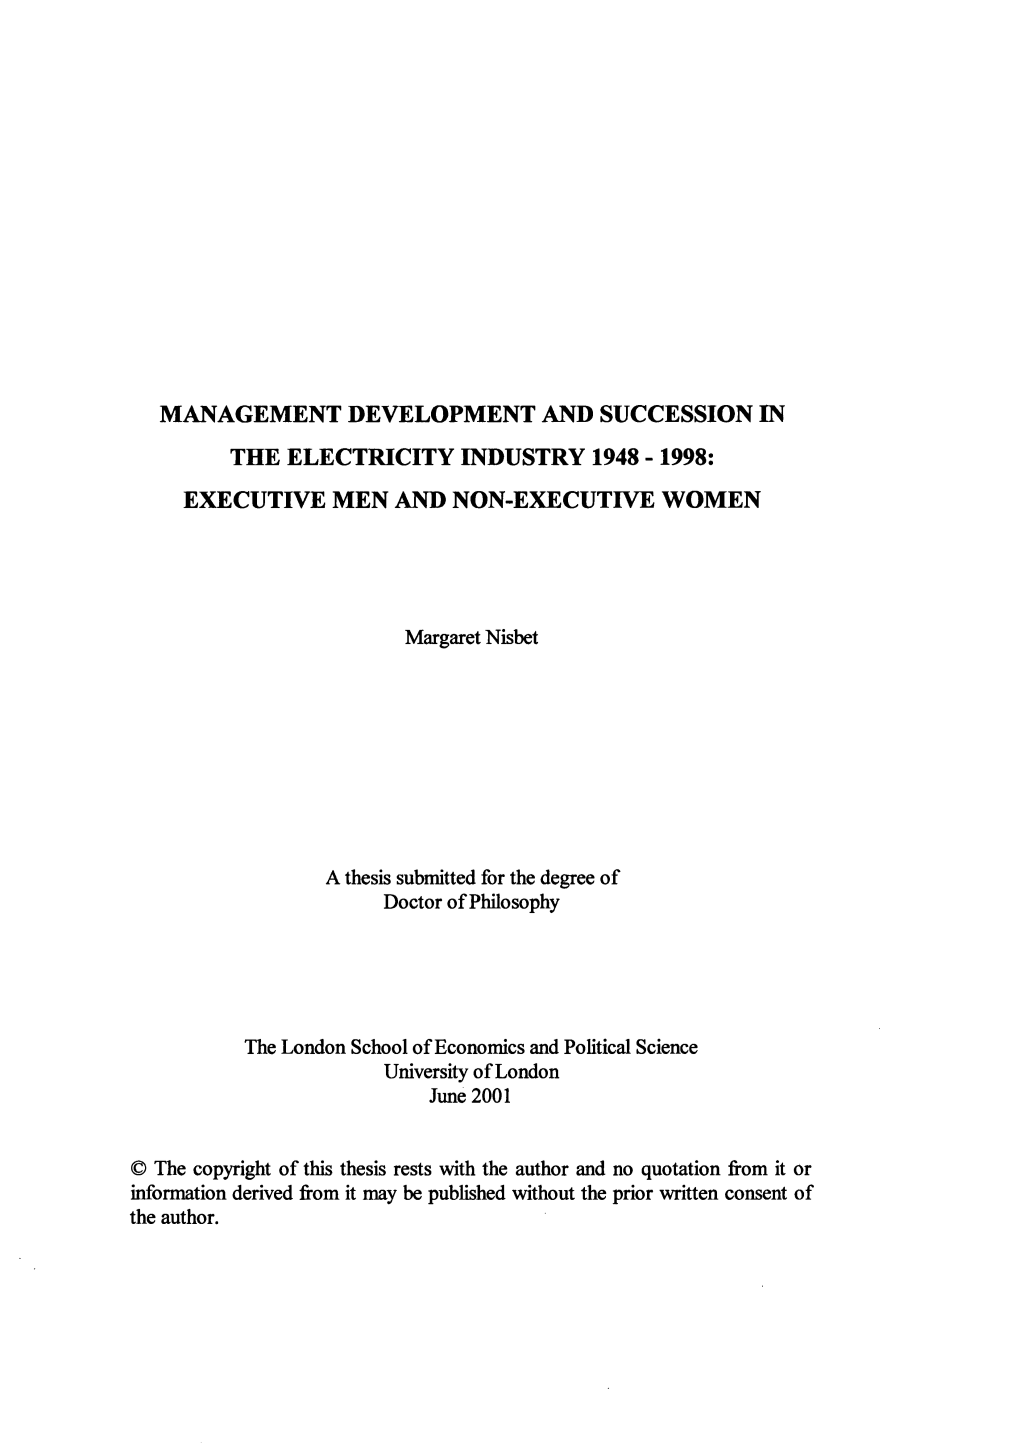 Management Development and Succession in the Electricity Industry 1948 - 1998: Executive Men and Non-Executive Women